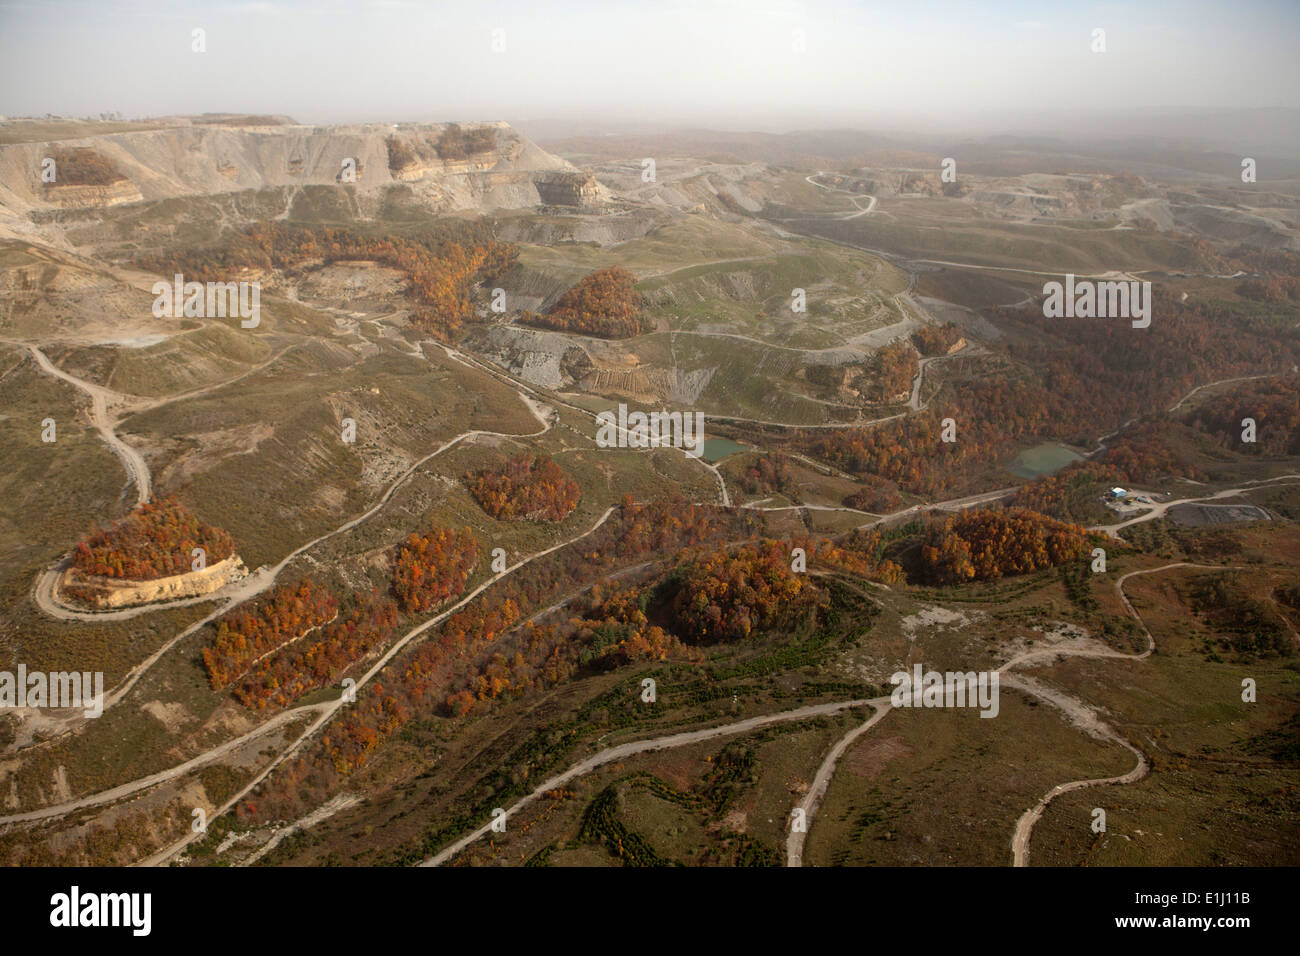 Land reclamation of coal mining mountaintop removal, Appalachia, Wise County, Virginia, USA, aerial view Stock Photo